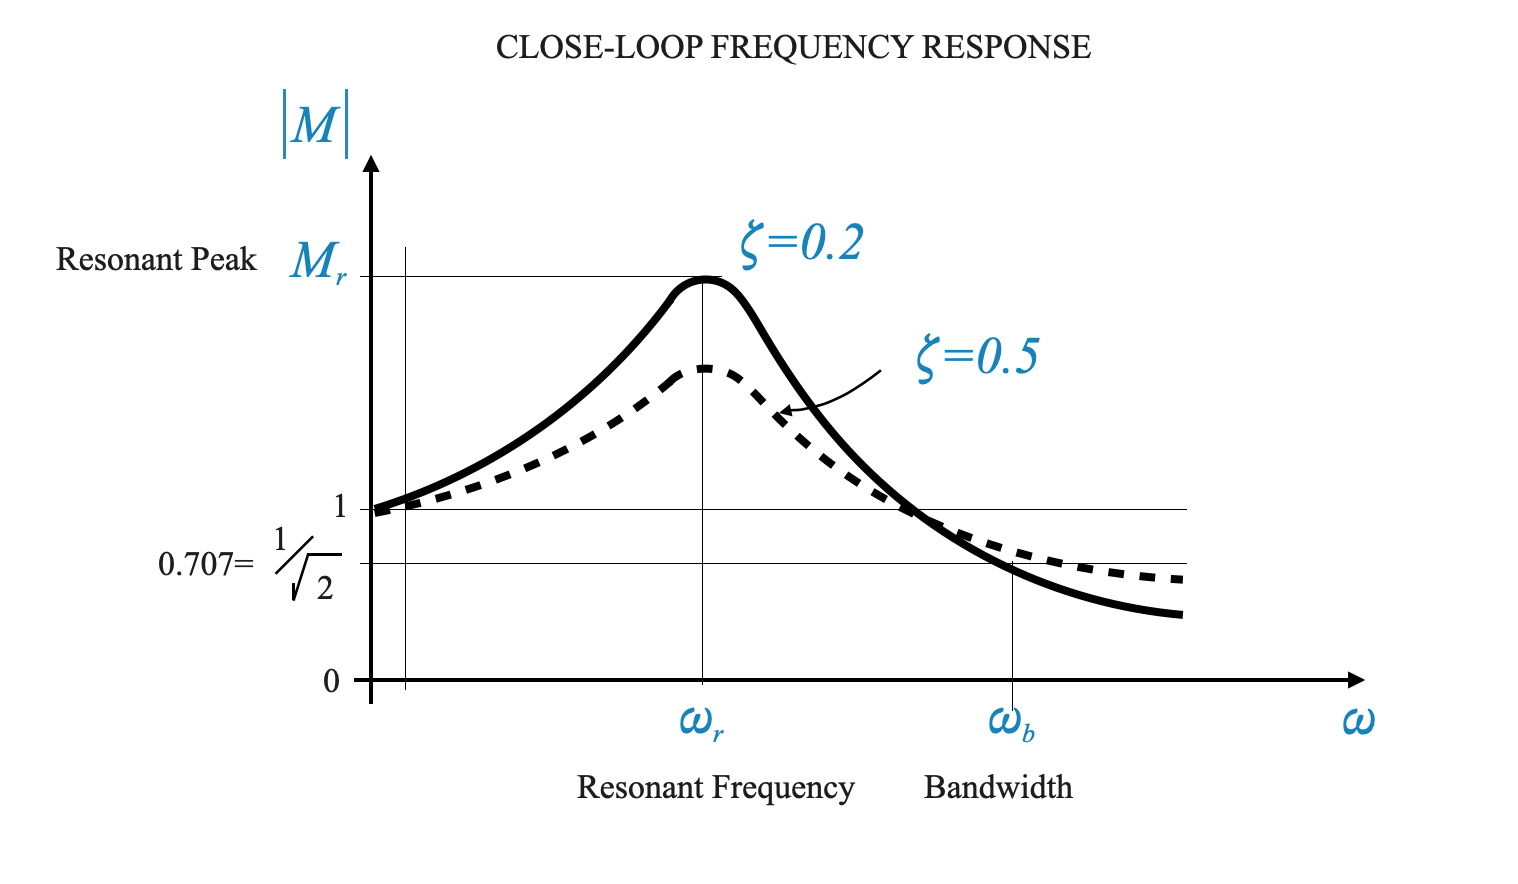 29_Feedback_system_performance_based_on_frequency_response_closed_loop_frequency_response_1